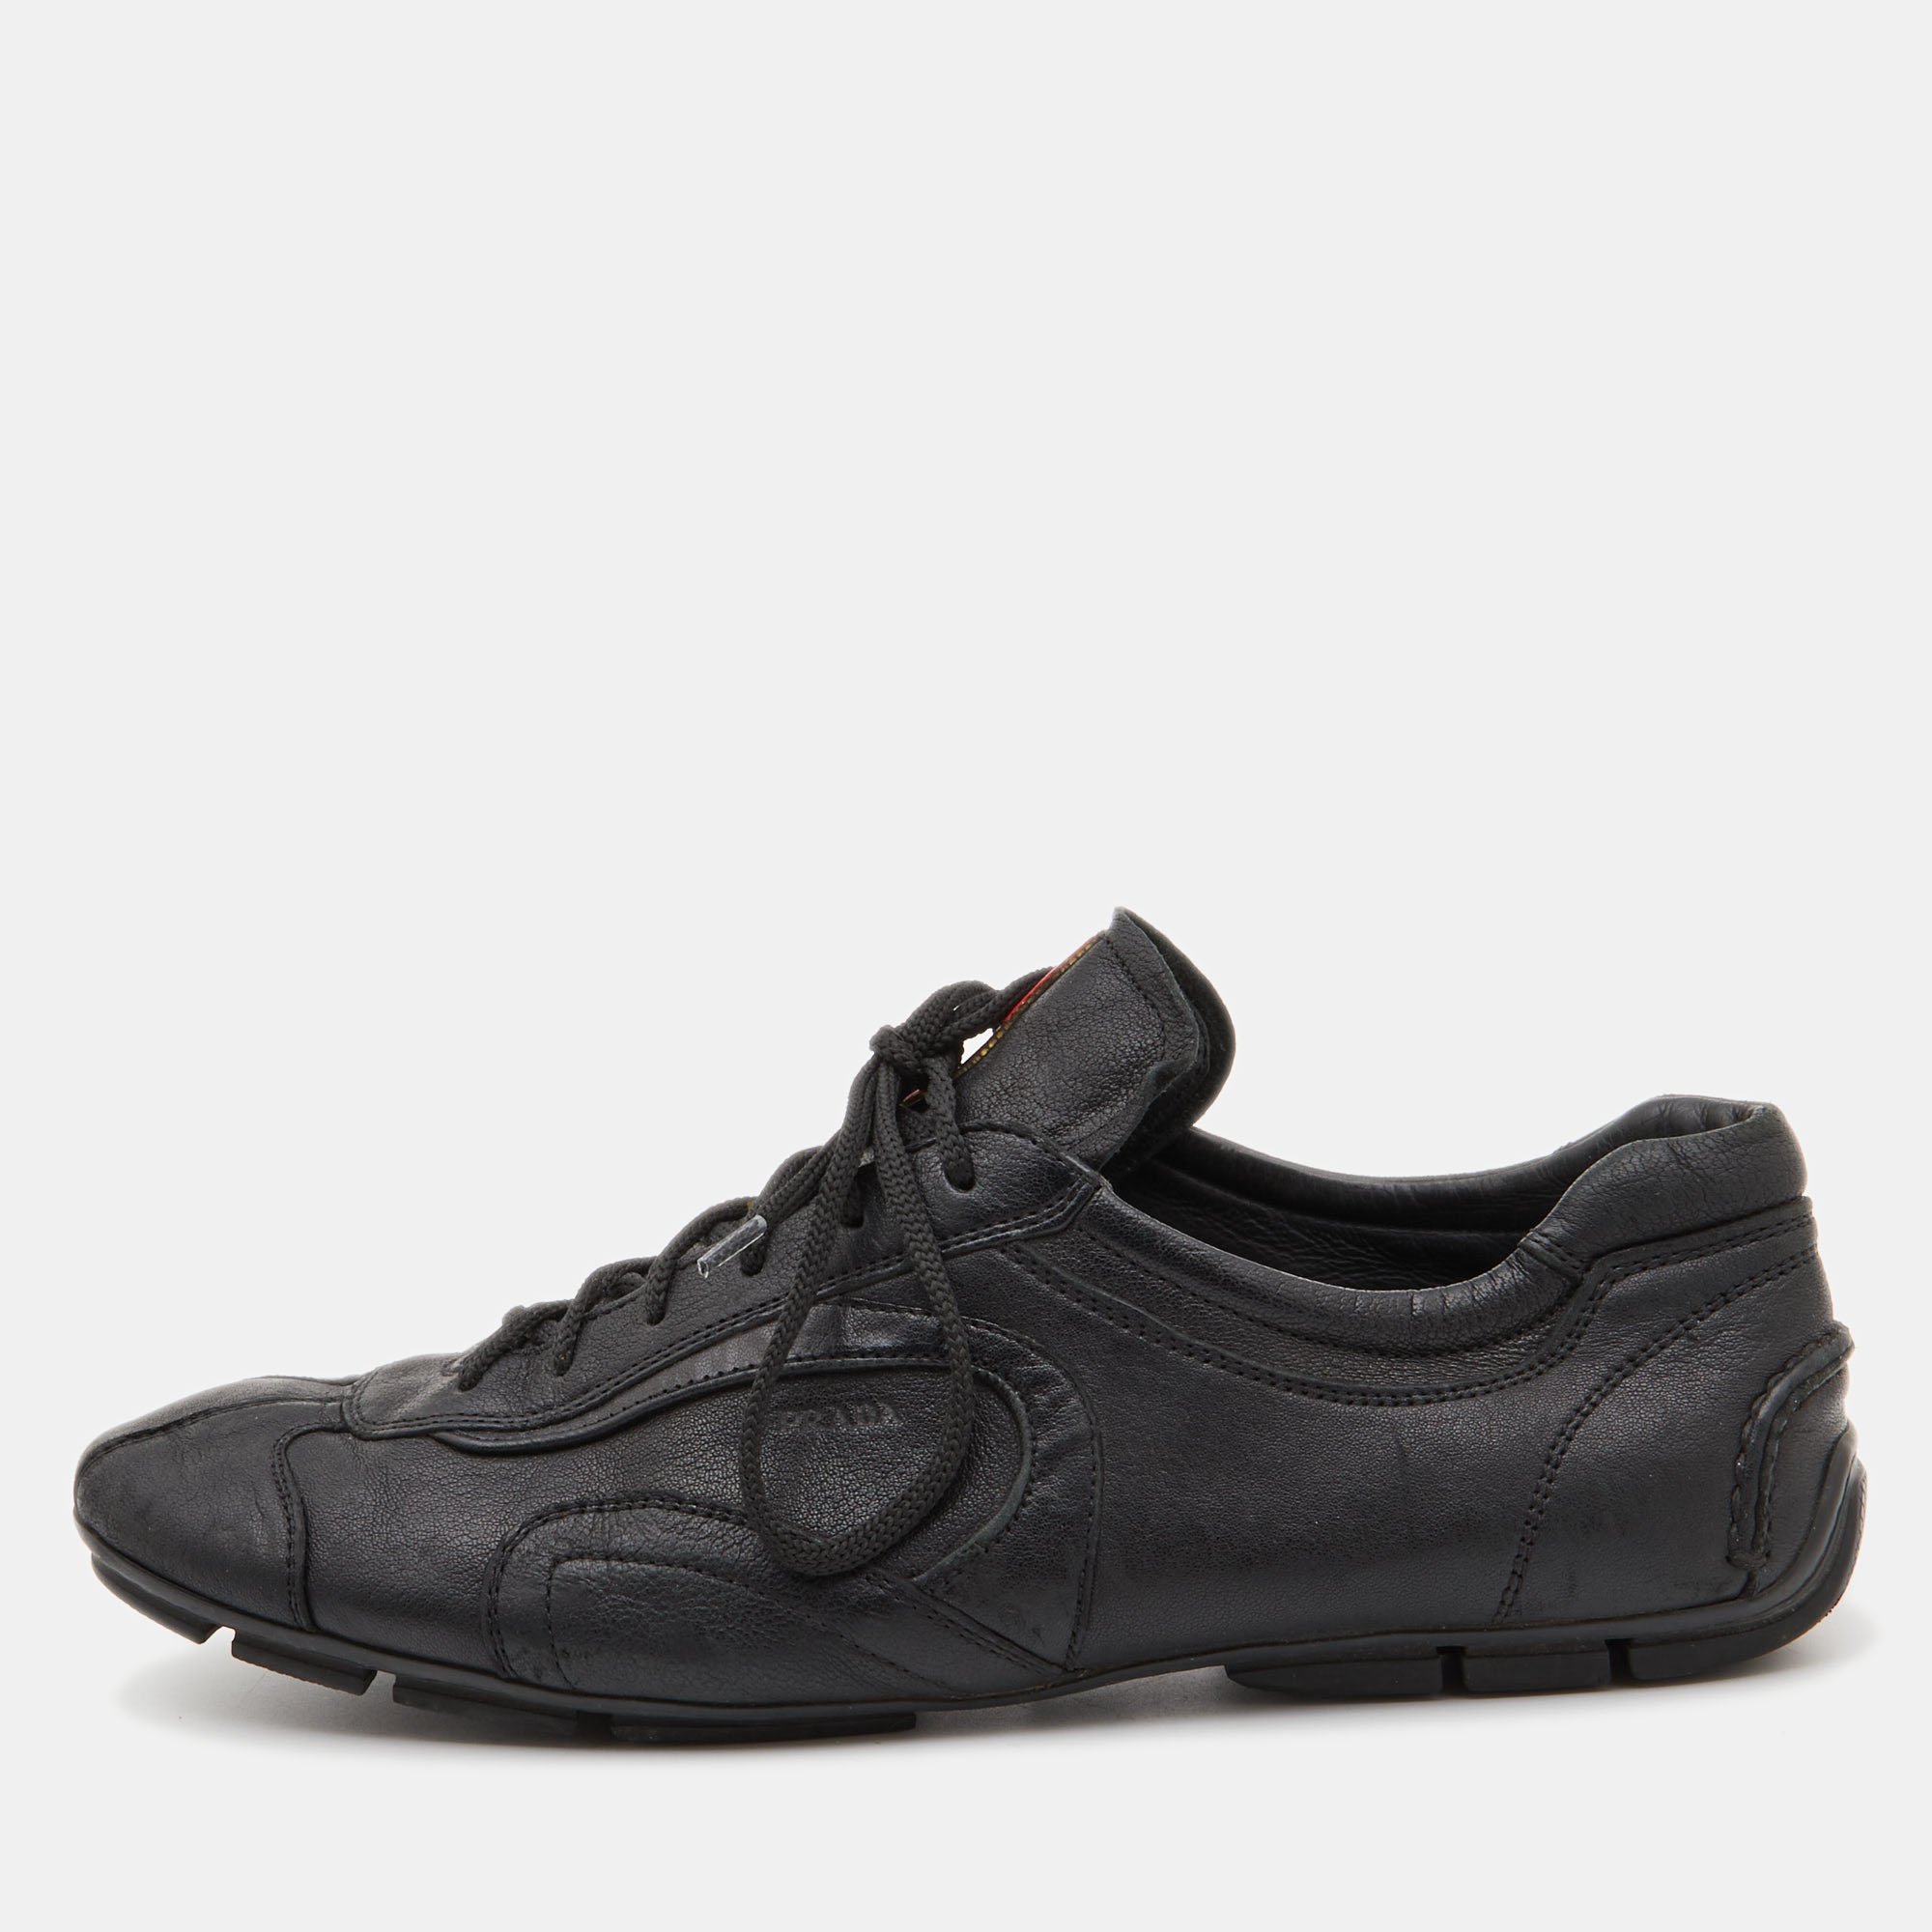 Pre-owned Prada Sports Black Leather Low Top Sneakers Size 43